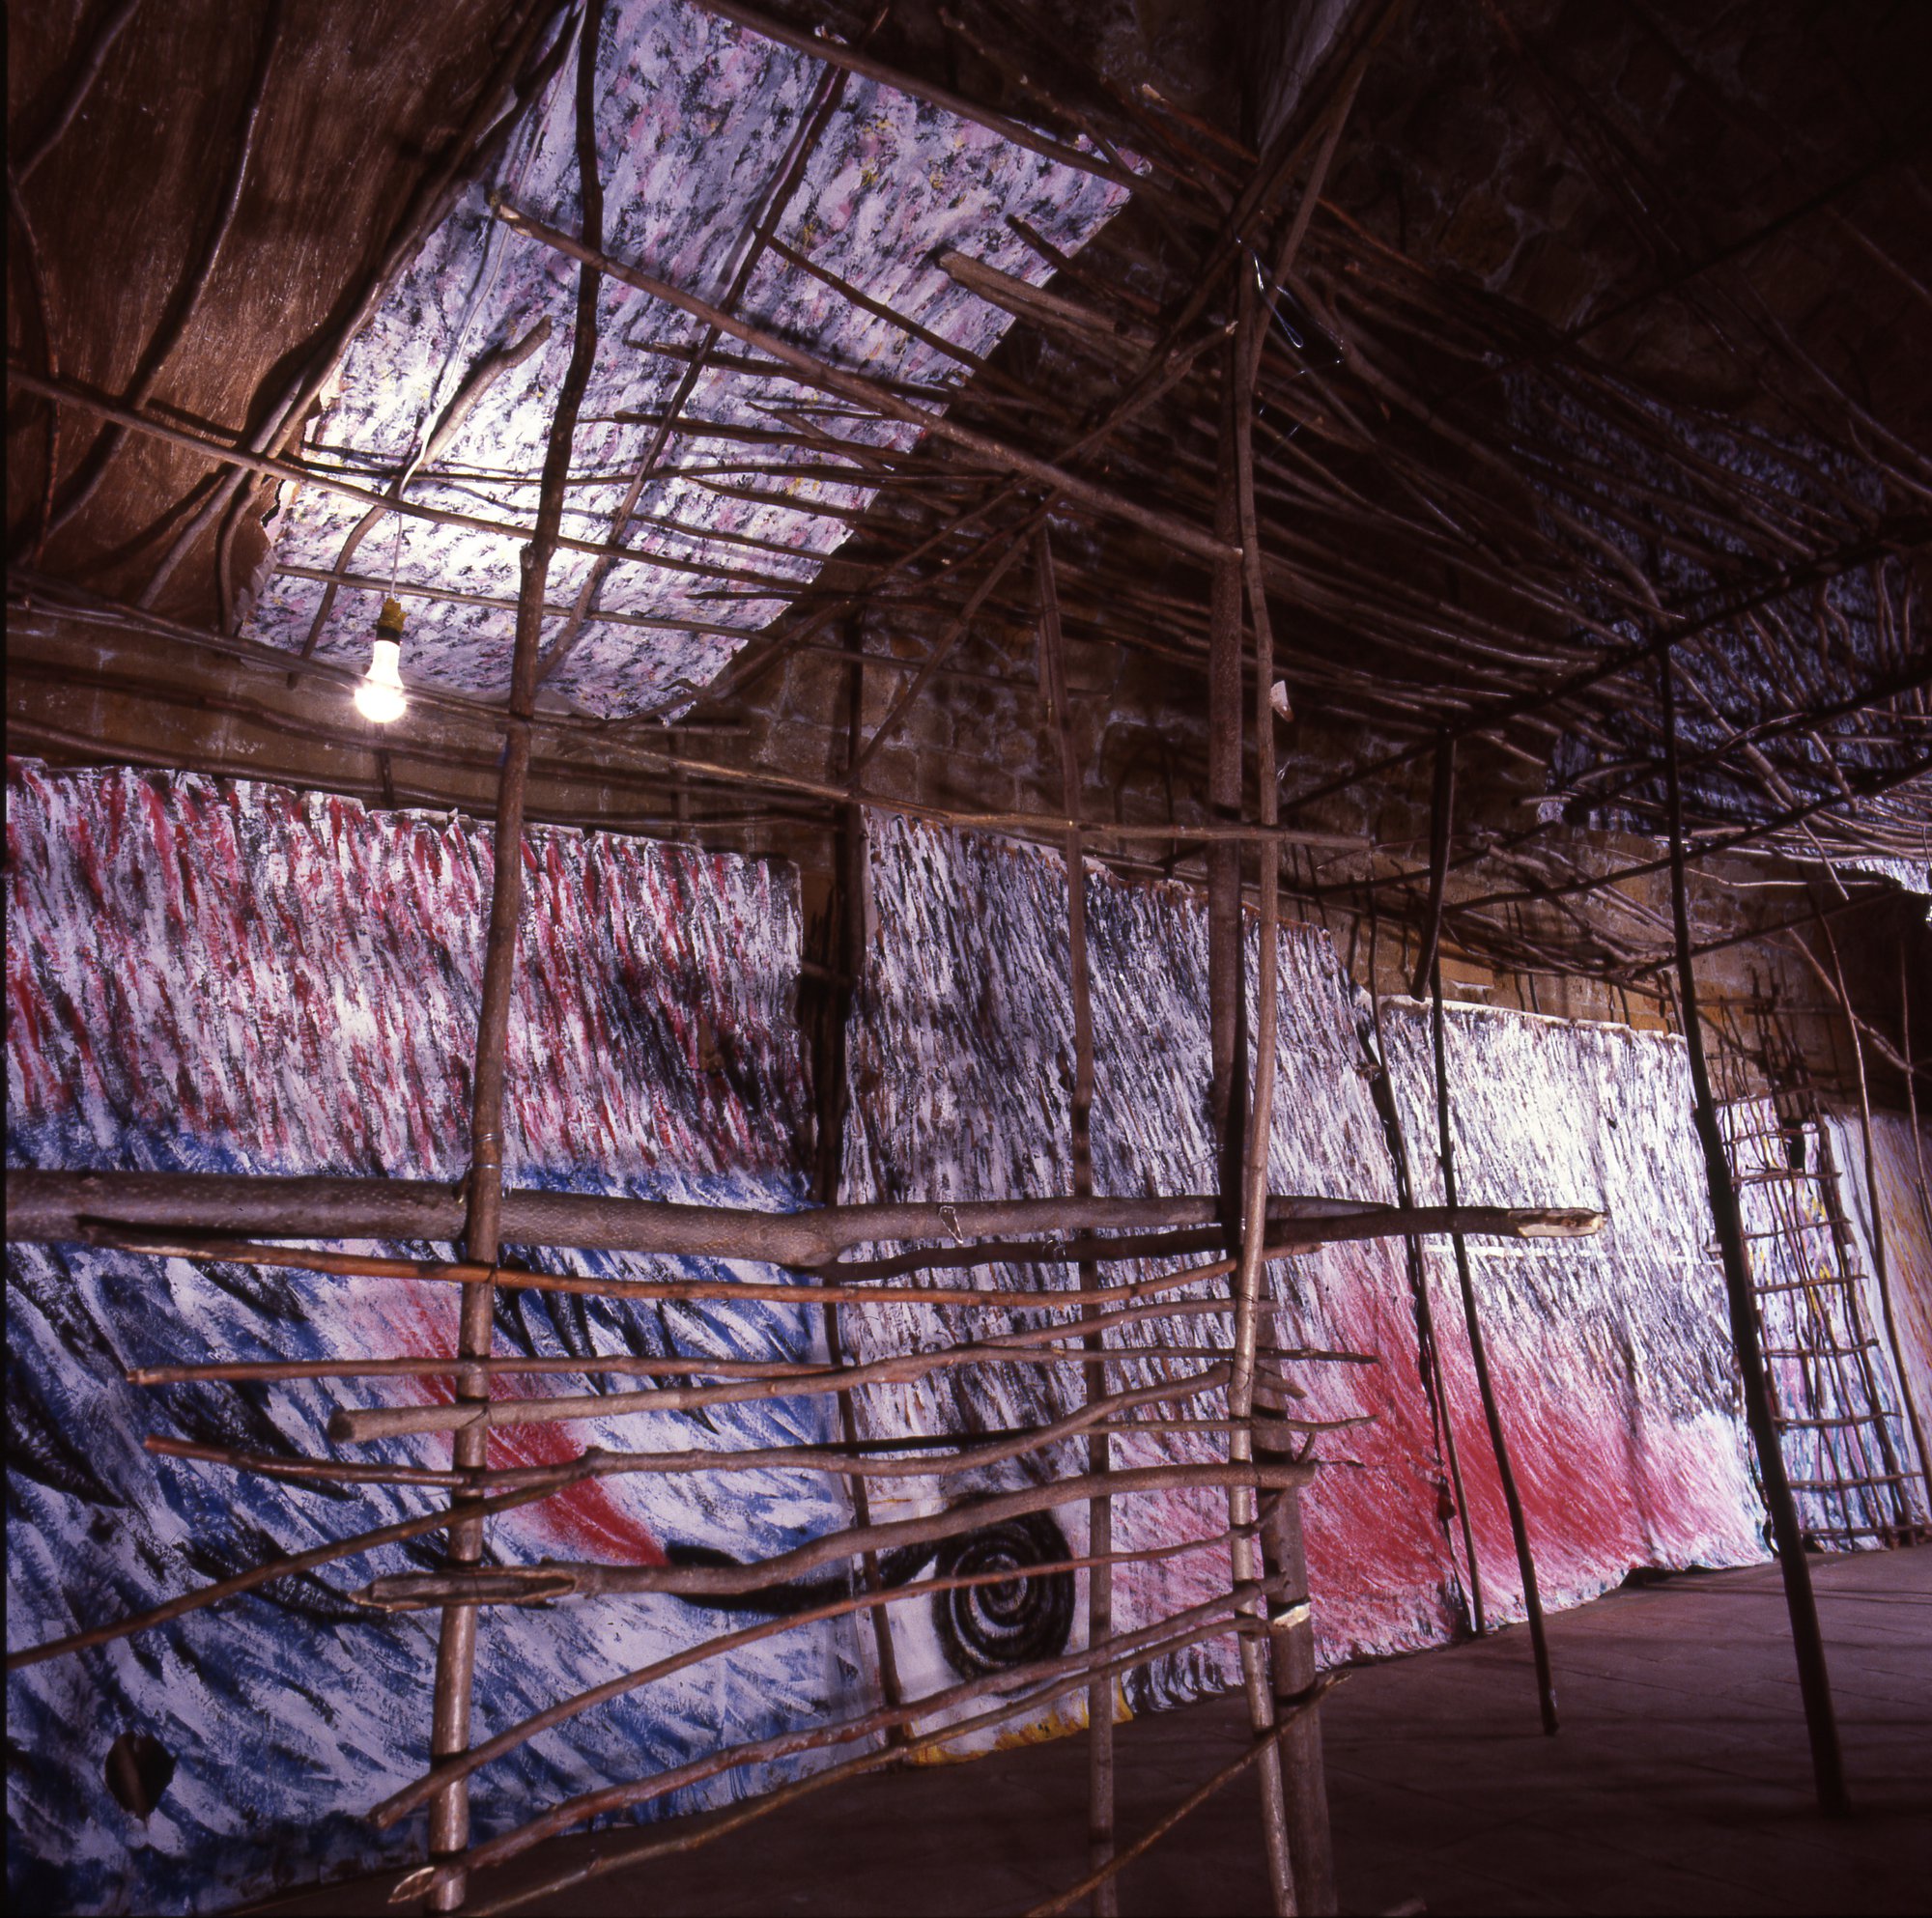 Thanasis Totsikas, Installation view, 7 Greek Artists: A New Journey, The Gate of Fammagusta (organized by The Nicosia Municipality, The DESTE Foundation for Contemporary Art, The Demetrios Z. Pierides Collection), Nicosia, 1983